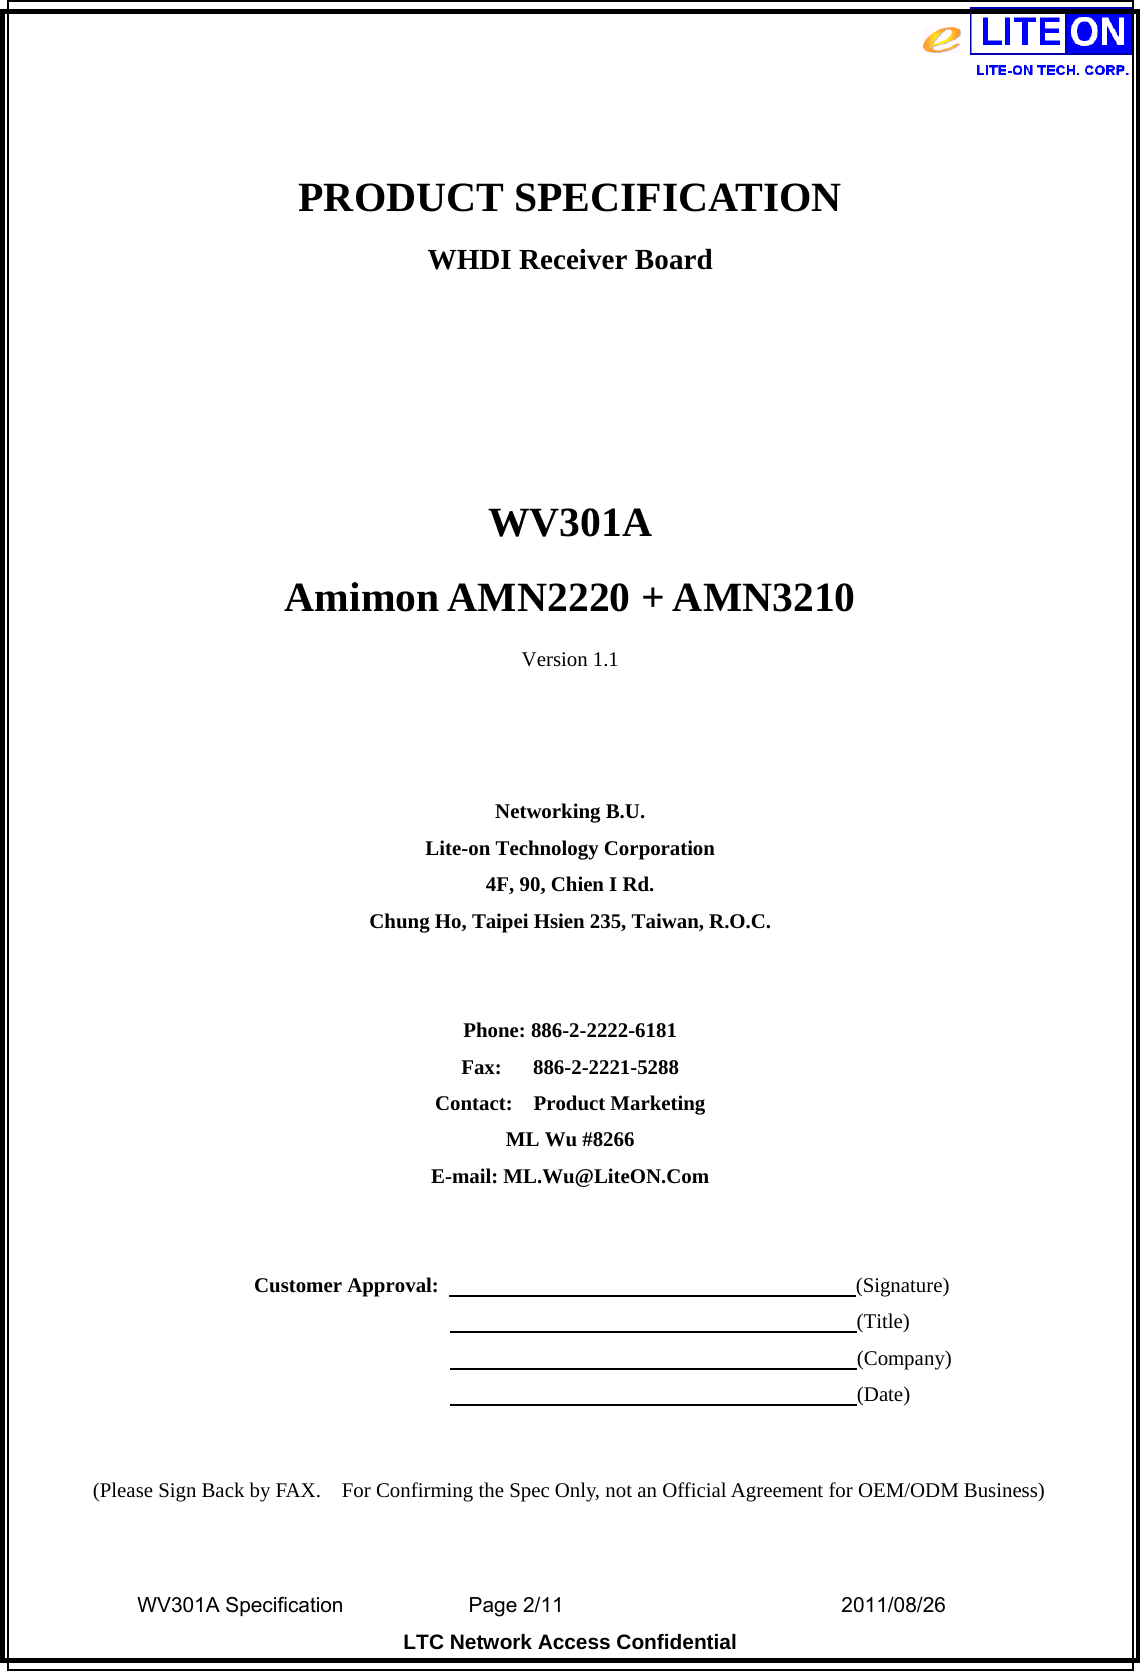  WV301A Specification                Page 2/11                                  2011/08/26  LTC Network Access Confidential  PRODUCT SPECIFICATION WHDI Receiver Board    WV301A Amimon AMN2220 + AMN3210 Version 1.1    Networking B.U. Lite-on Technology Corporation 4F, 90, Chien I Rd. Chung Ho, Taipei Hsien 235, Taiwan, R.O.C.   Phone: 886-2-2222-6181 Fax:   886-2-2221-5288 Contact:  Product Marketing ML Wu #8266 E-mail: ML.Wu@LiteON.Com     Customer Approval:                                        (Signature)                                                                      (Title)                                                                      (Company)                                                                      (Date)   (Please Sign Back by FAX.    For Confirming the Spec Only, not an Official Agreement for OEM/ODM Business) 